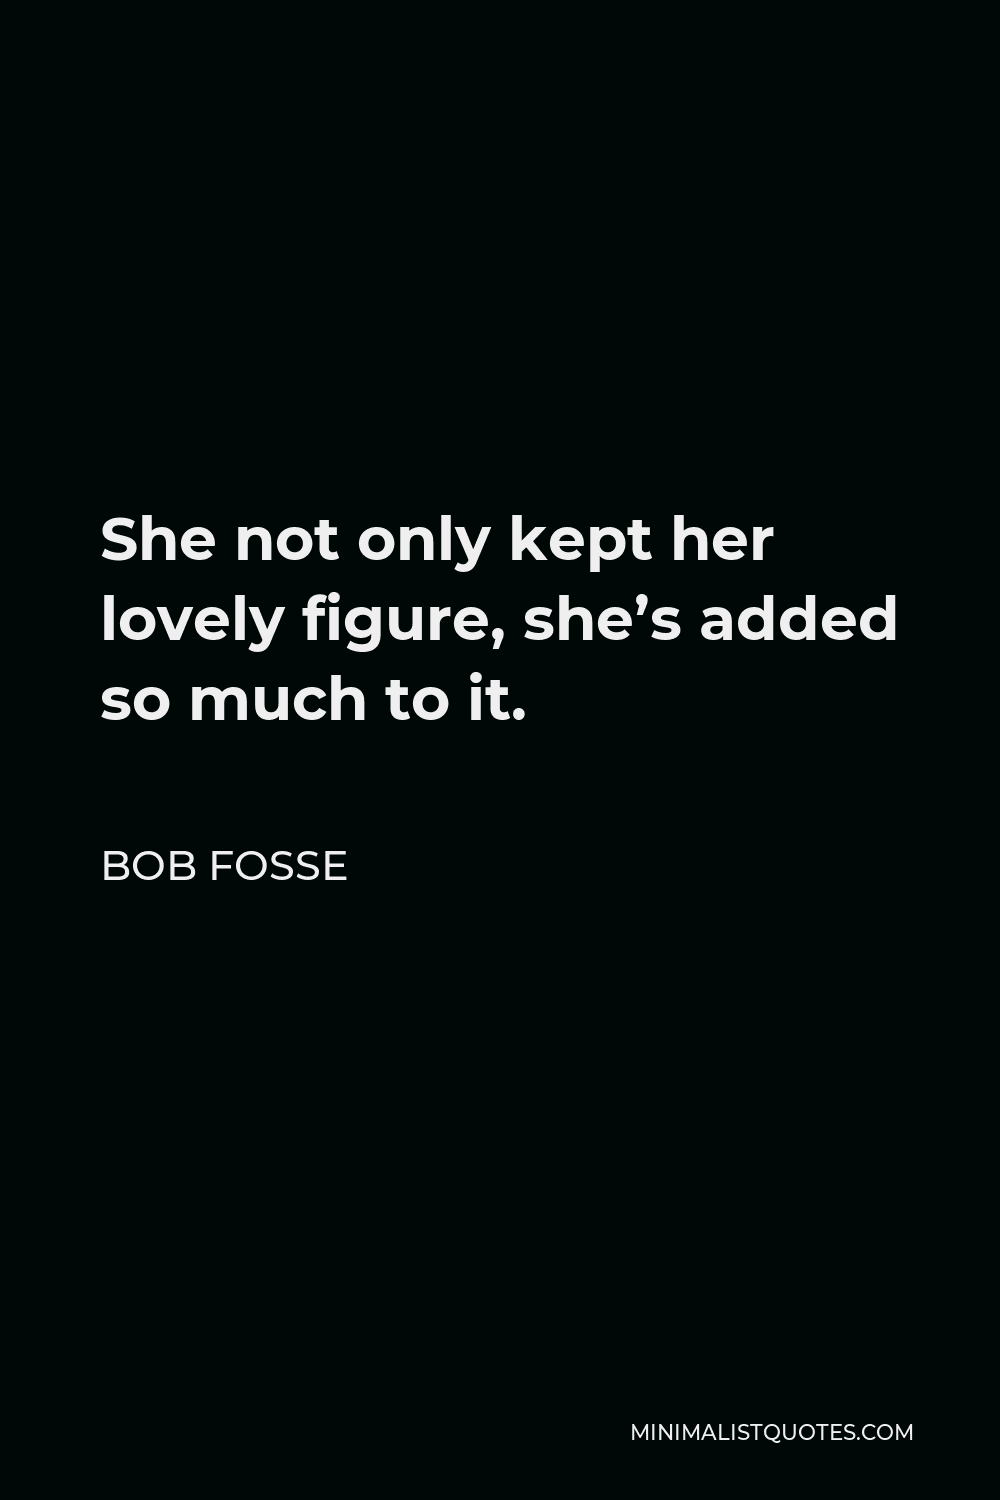 Bob Fosse Quote - She not only kept her lovely figure, she’s added so much to it.